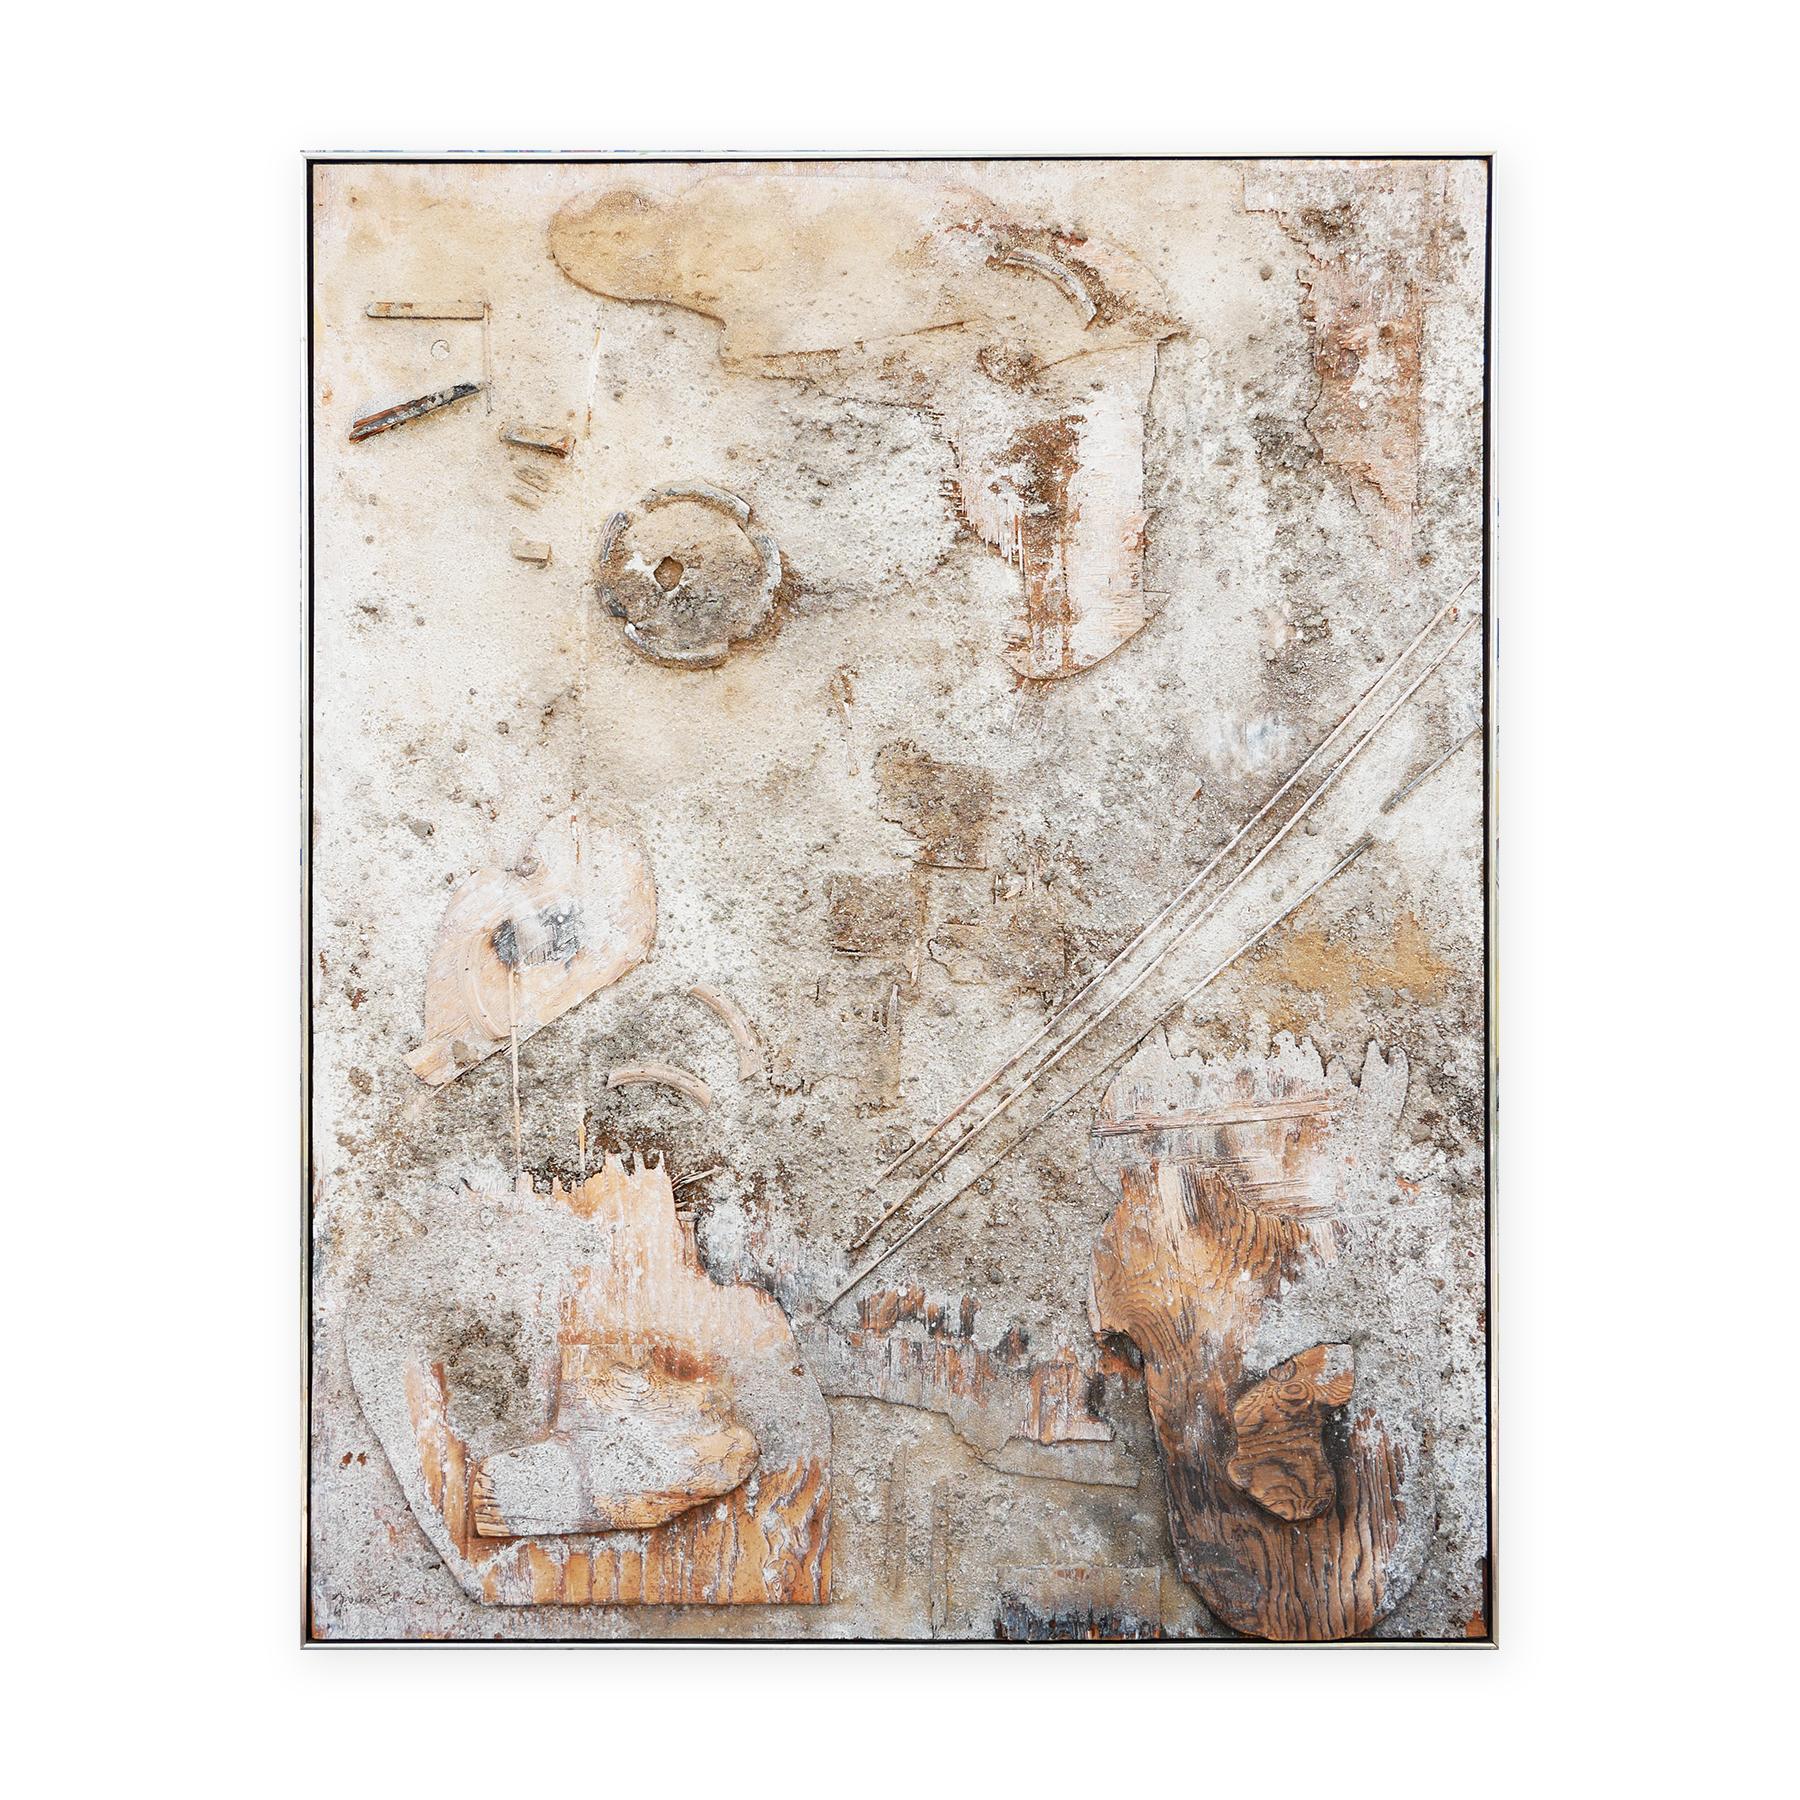 Modern Abstract Brown and White Assemblage Construction Sculpture on Canvas - Painting by Juan Sanchez-Juarez